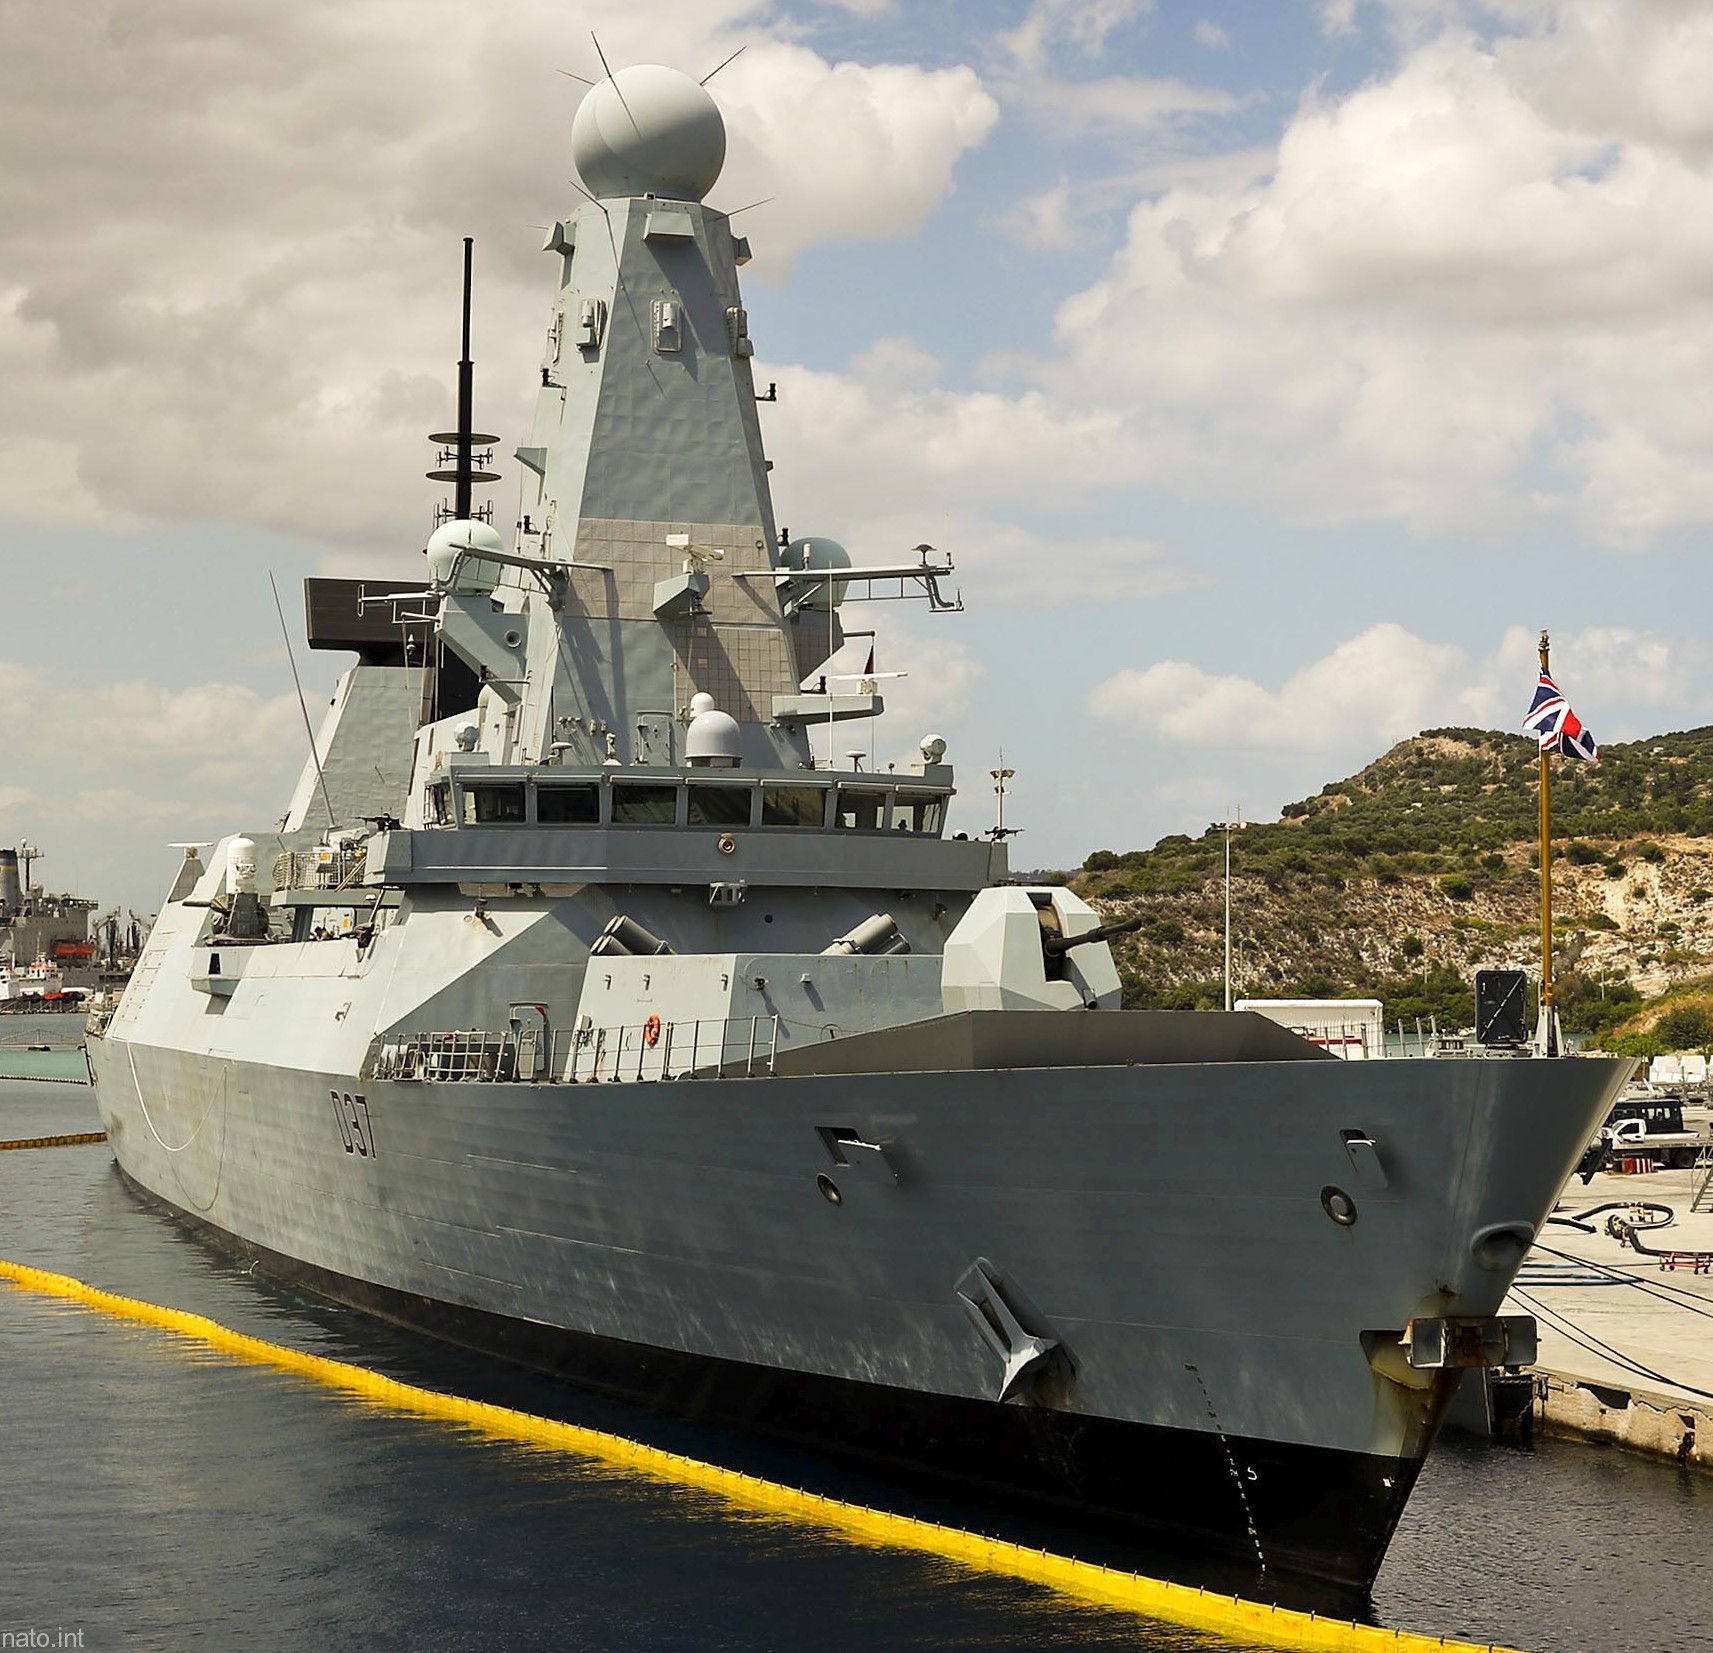 d37 hms duncan d-37 type 45 daring class guided missile destroyer ddg royal navy sea viper 31